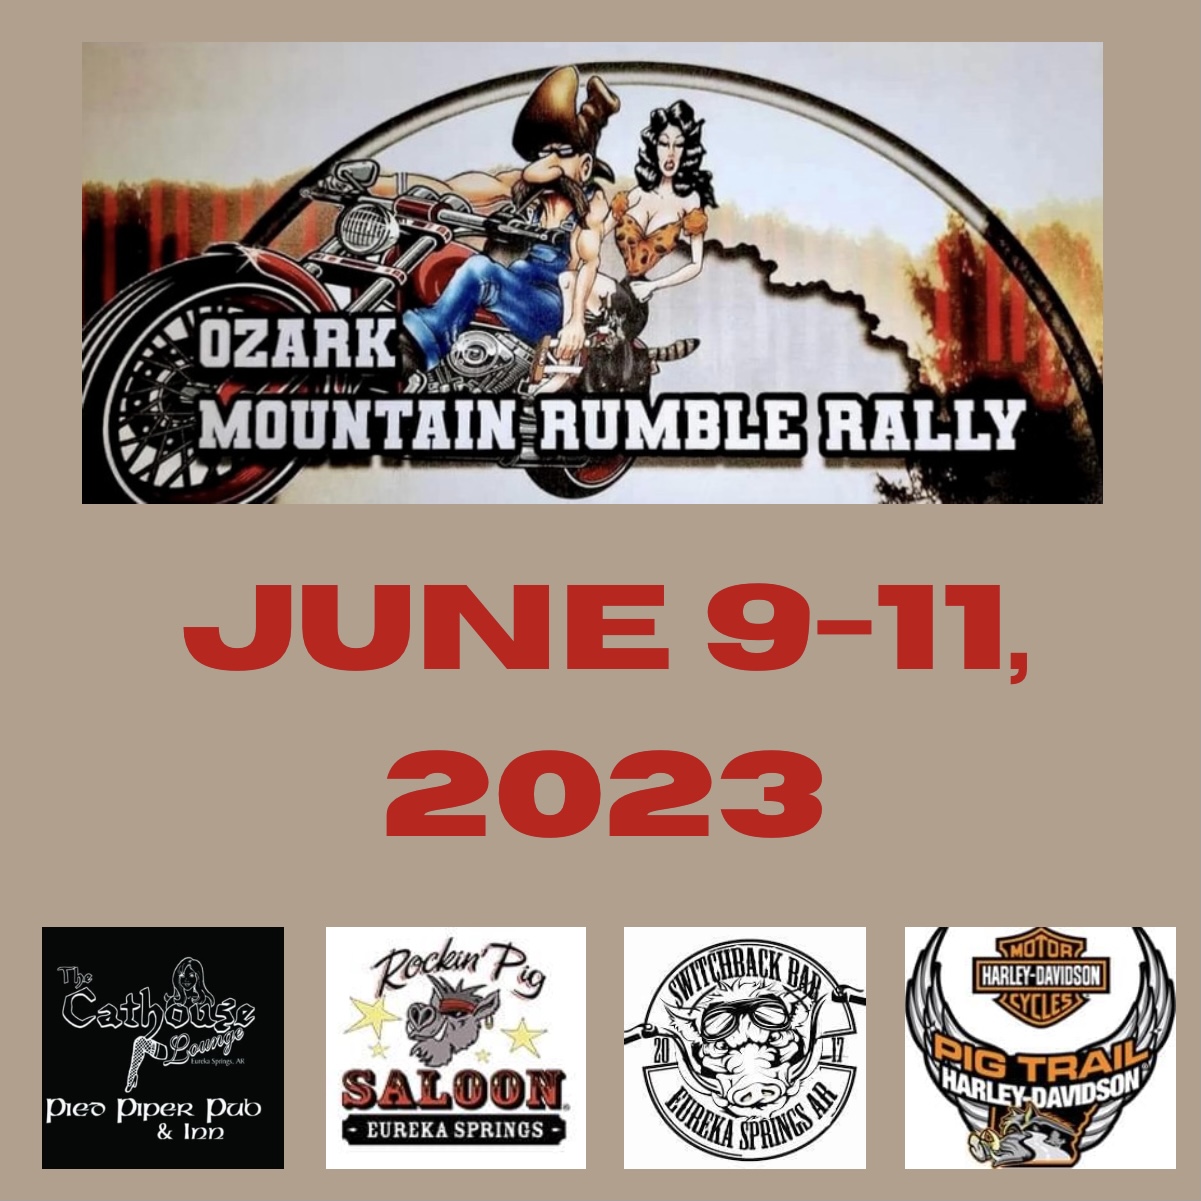 Featured image for “Ozark Mountain Rumble Rally”